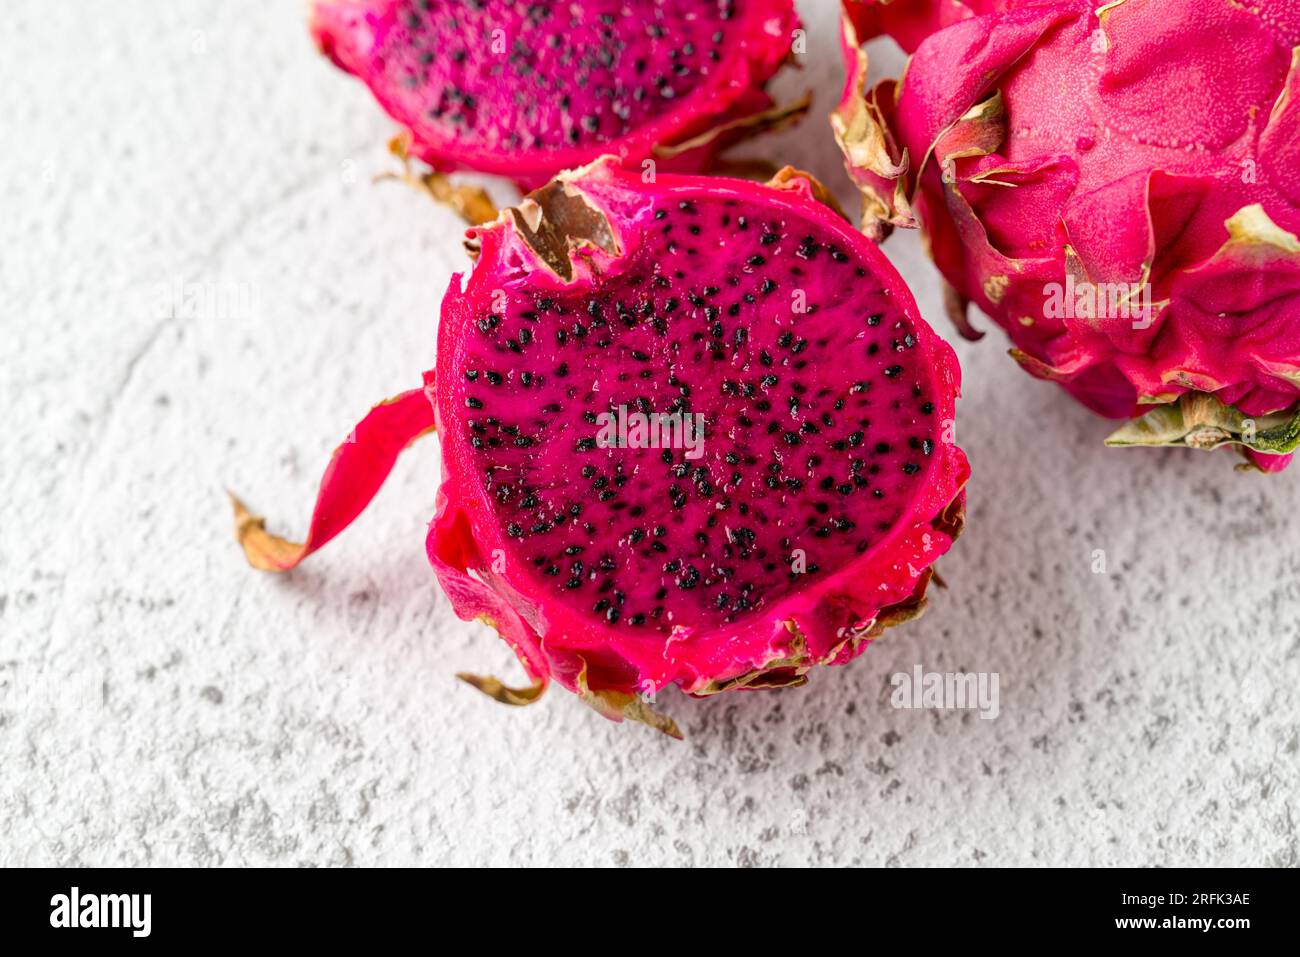 Ripe red dragon fruit on stone table Stock Photo